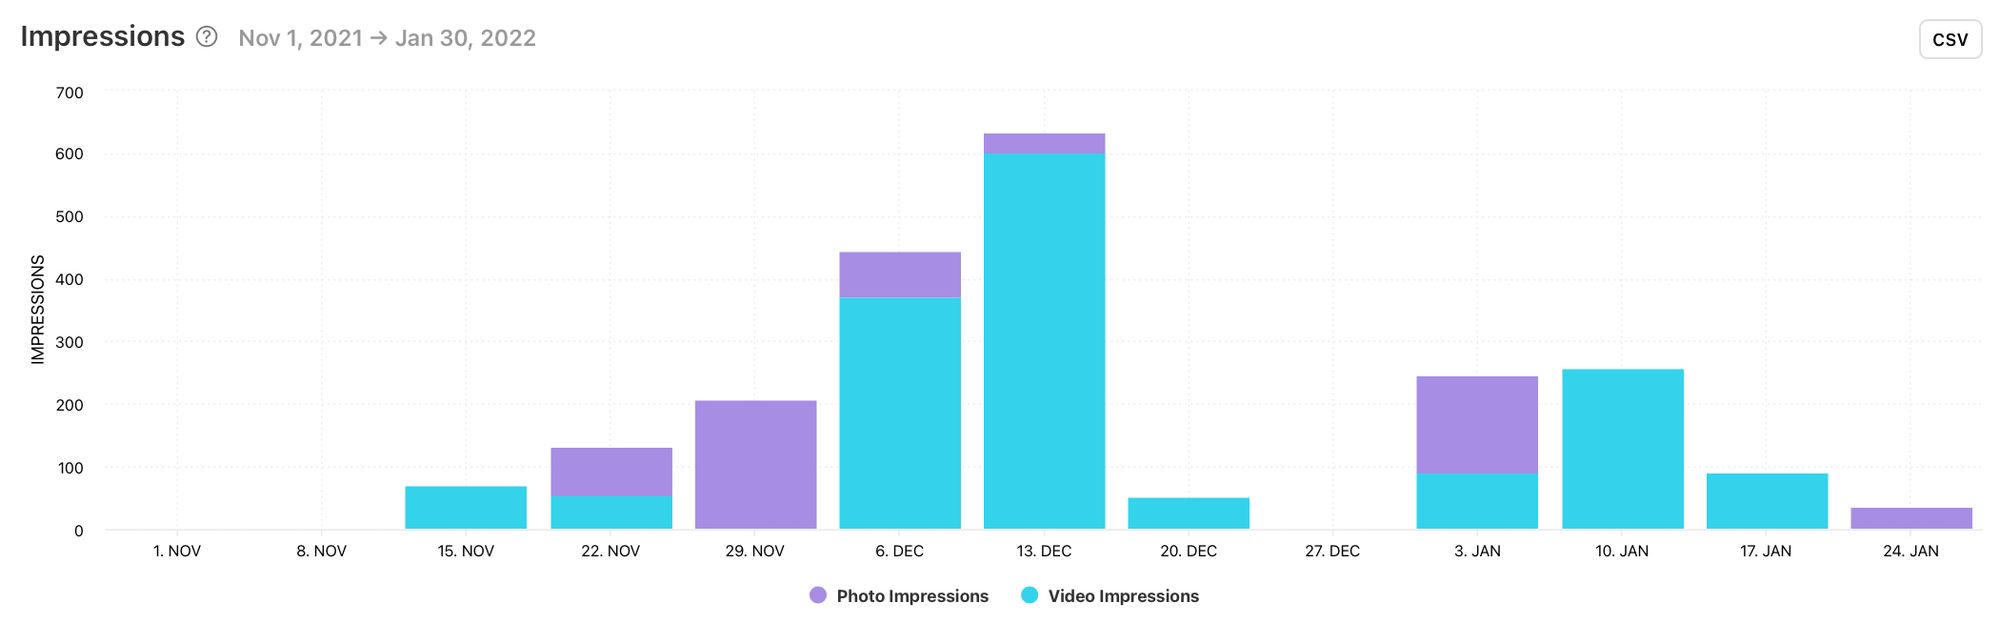 Impressions graph by Minter.io broken into photo and video impressions on Instagram stories posts